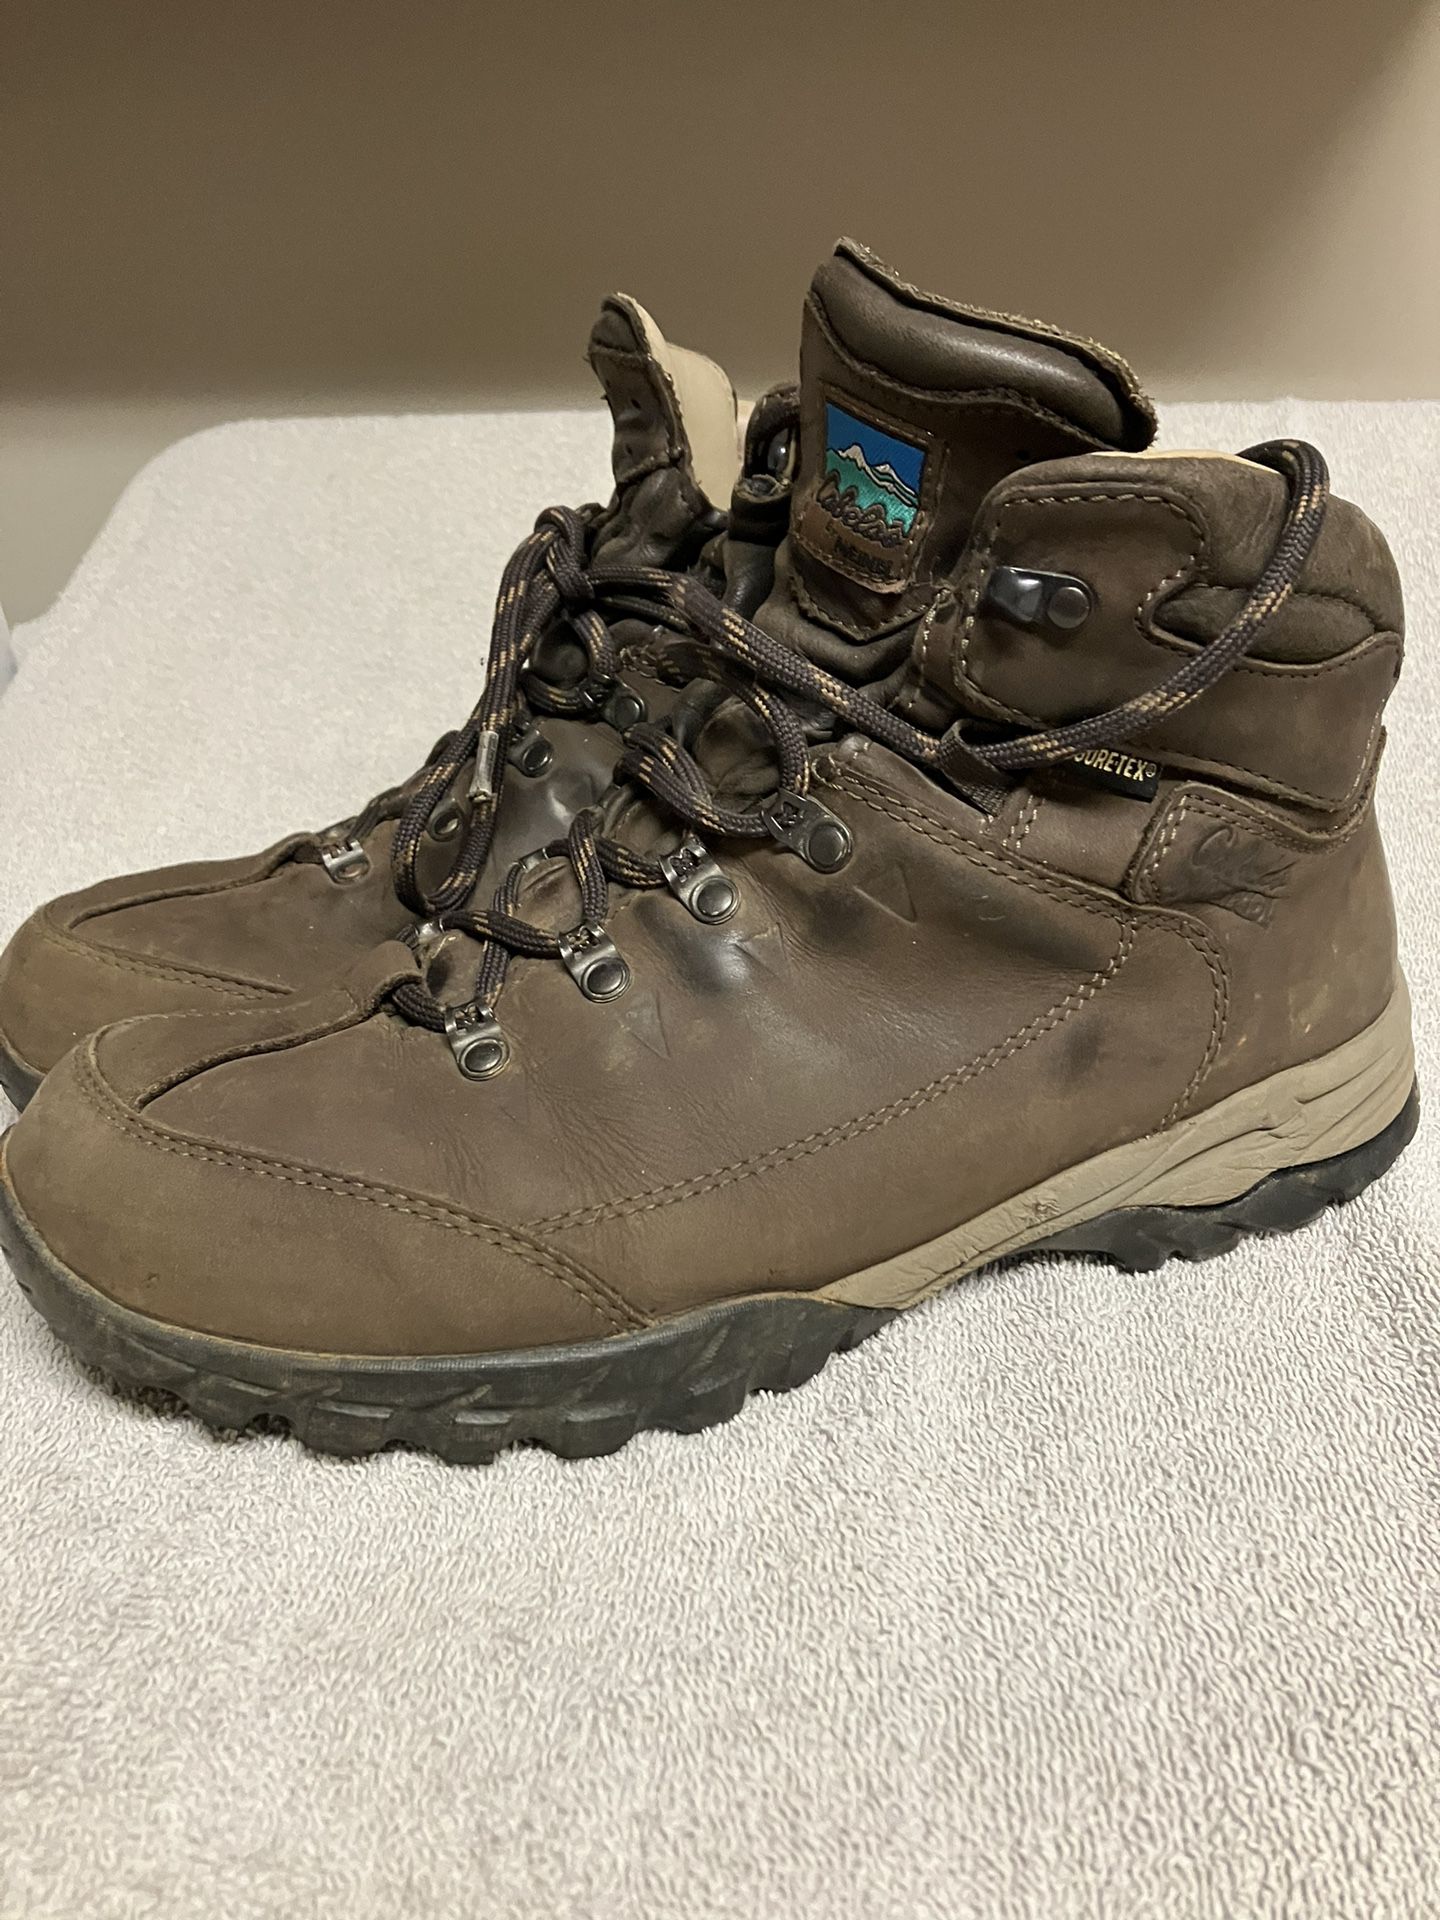 Meindl Gore Tex Boots